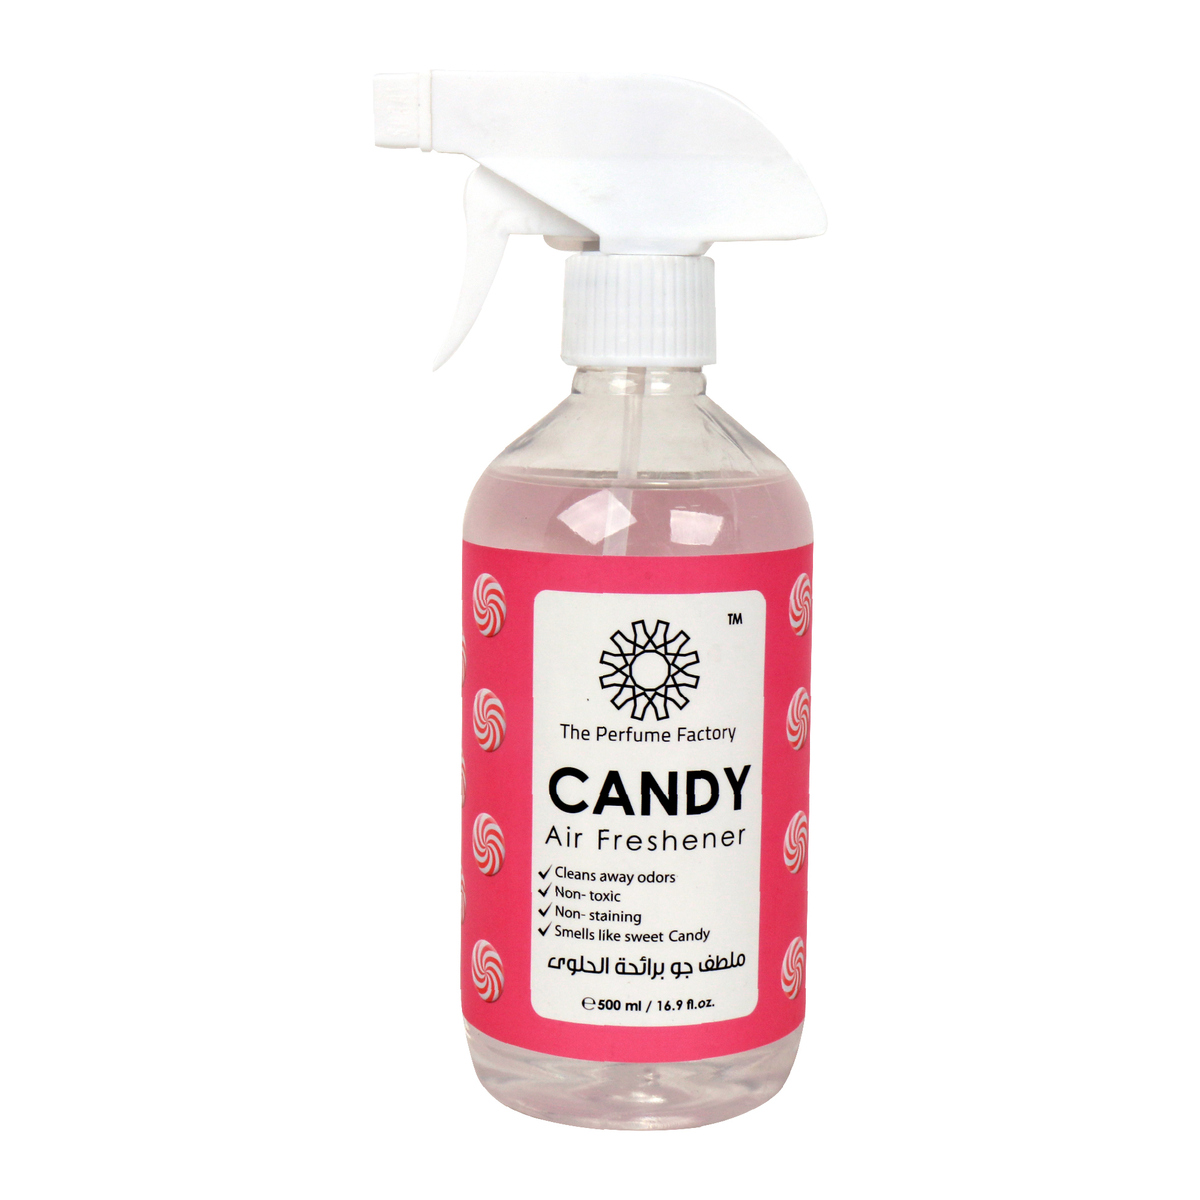 The Perfume Factory Air Freshener Candy 500ml